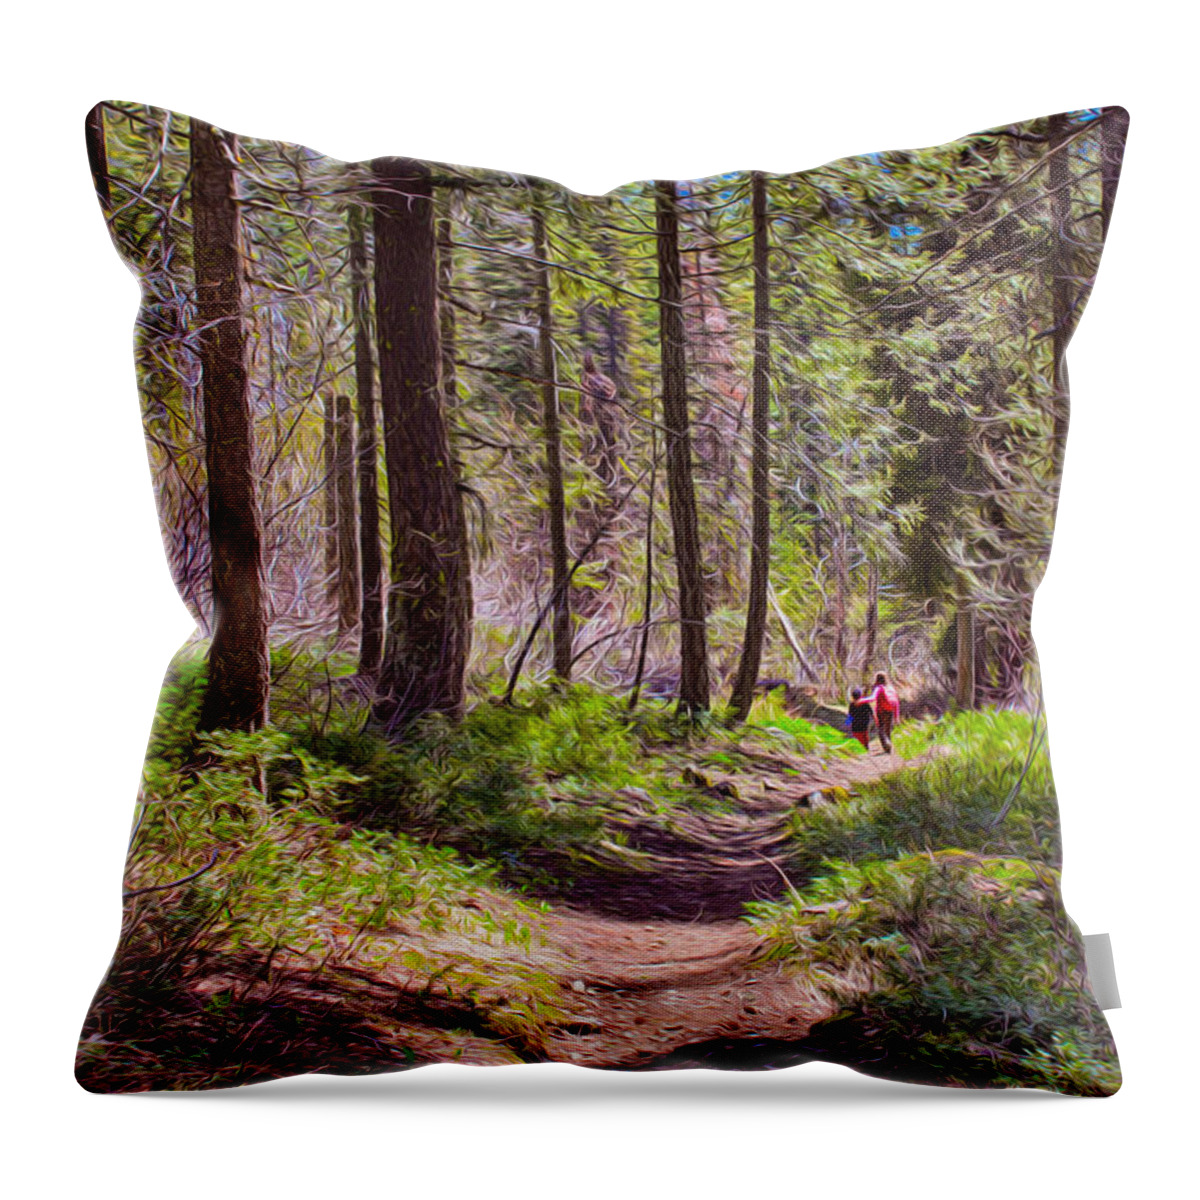 Twisp River Throw Pillow featuring the painting Twisp River Trail by Omaste Witkowski